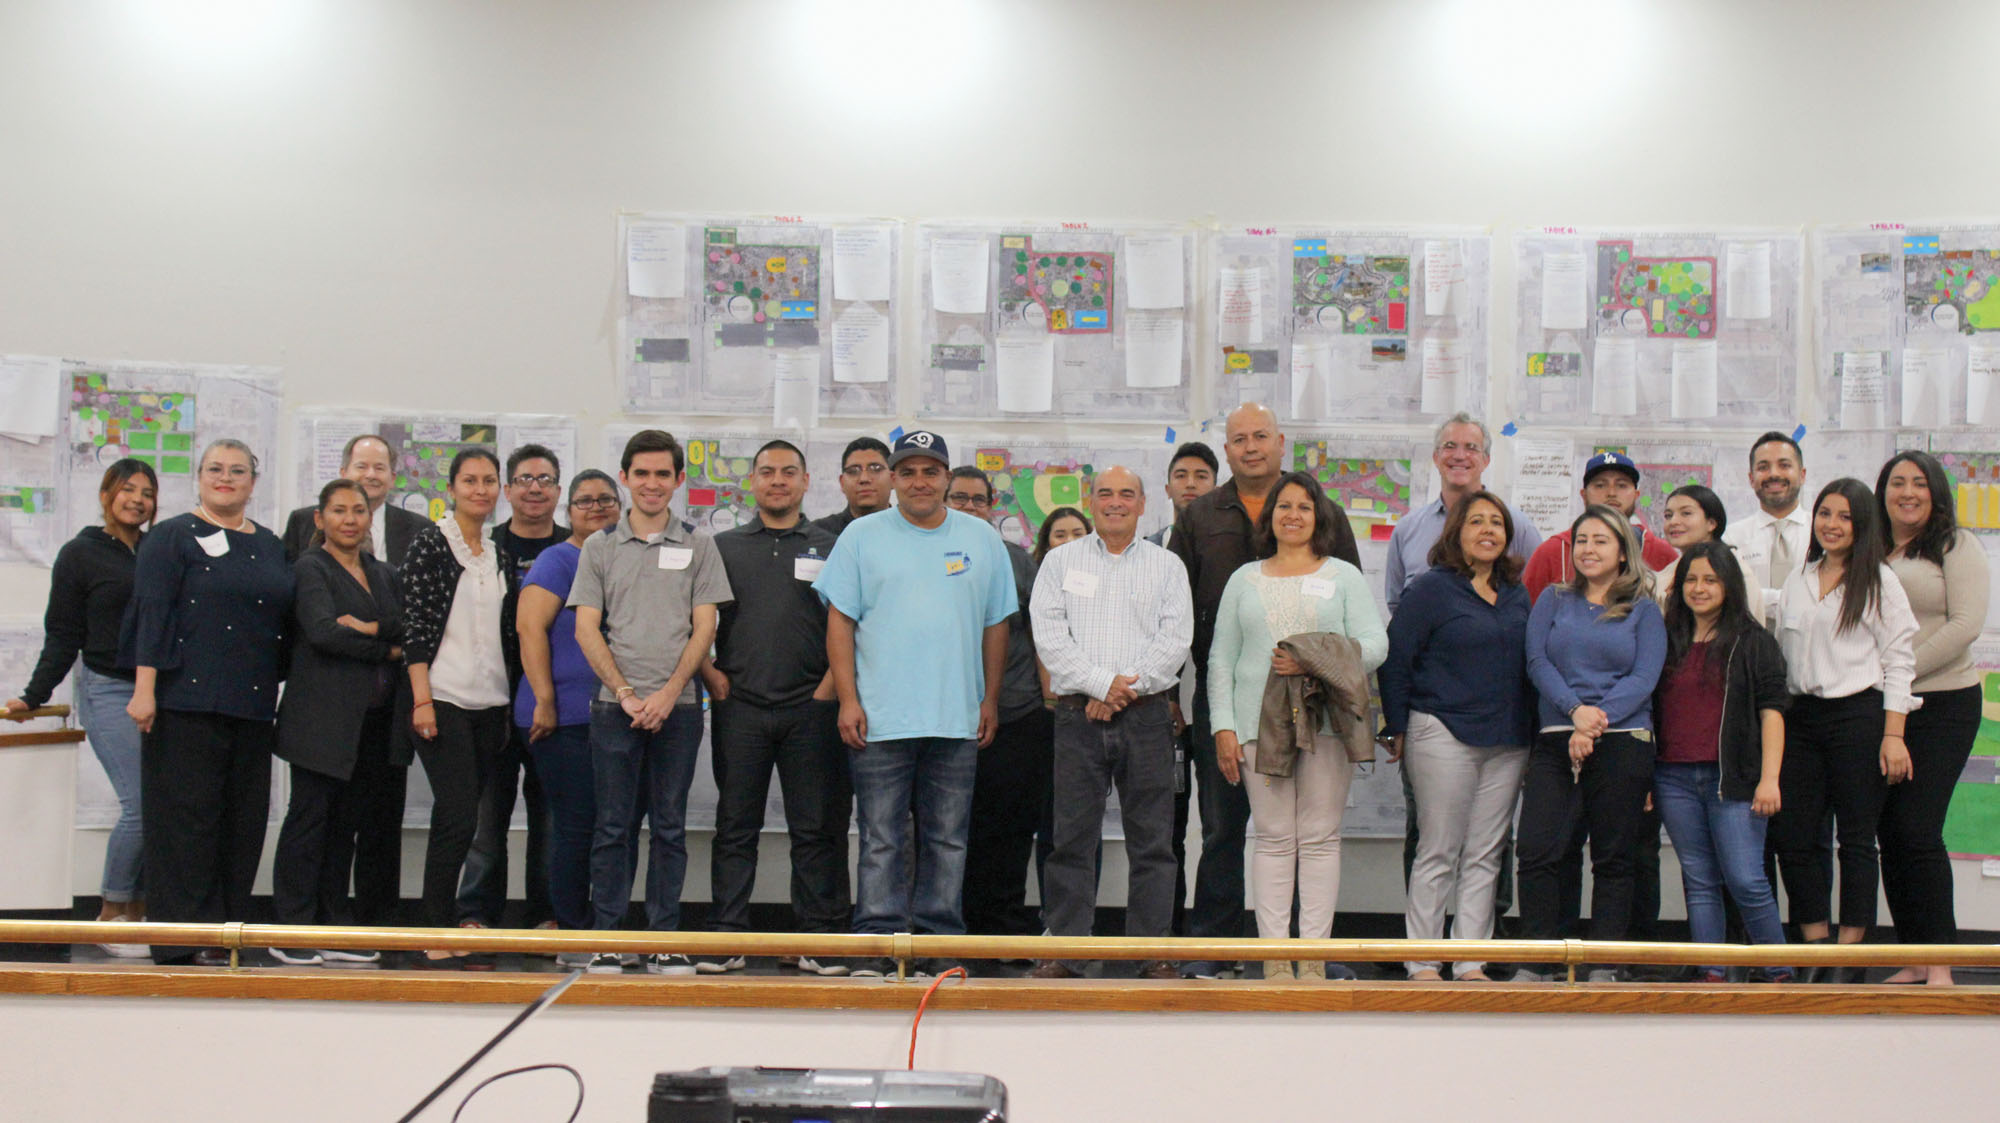 A group of people after a park planning process with planning documents on the wall behind them